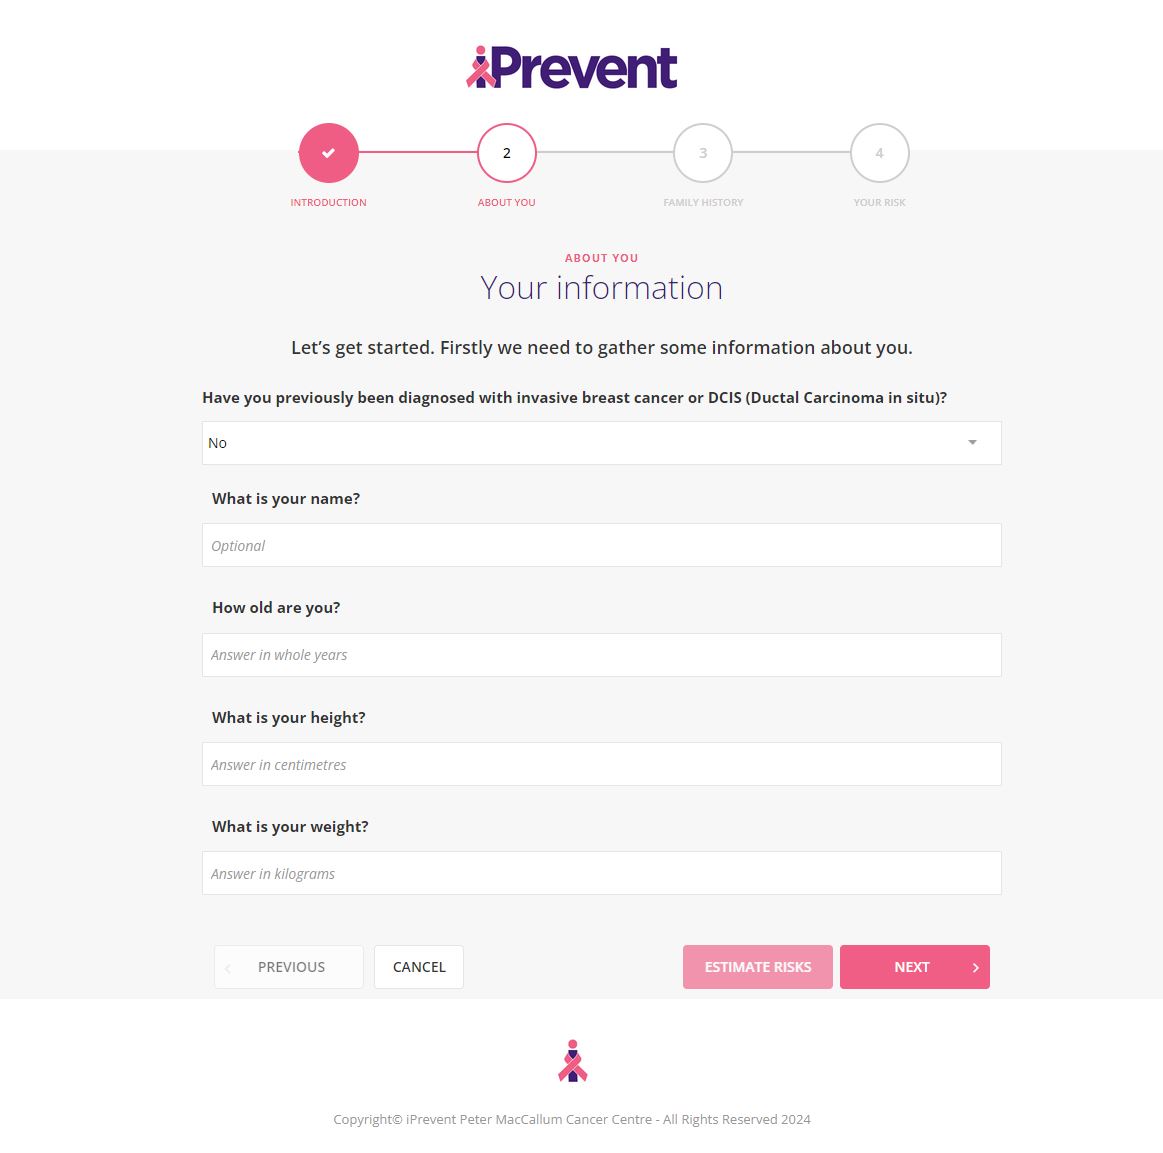 A screenshot of the iPrevent breast cancer risk assessment tool website